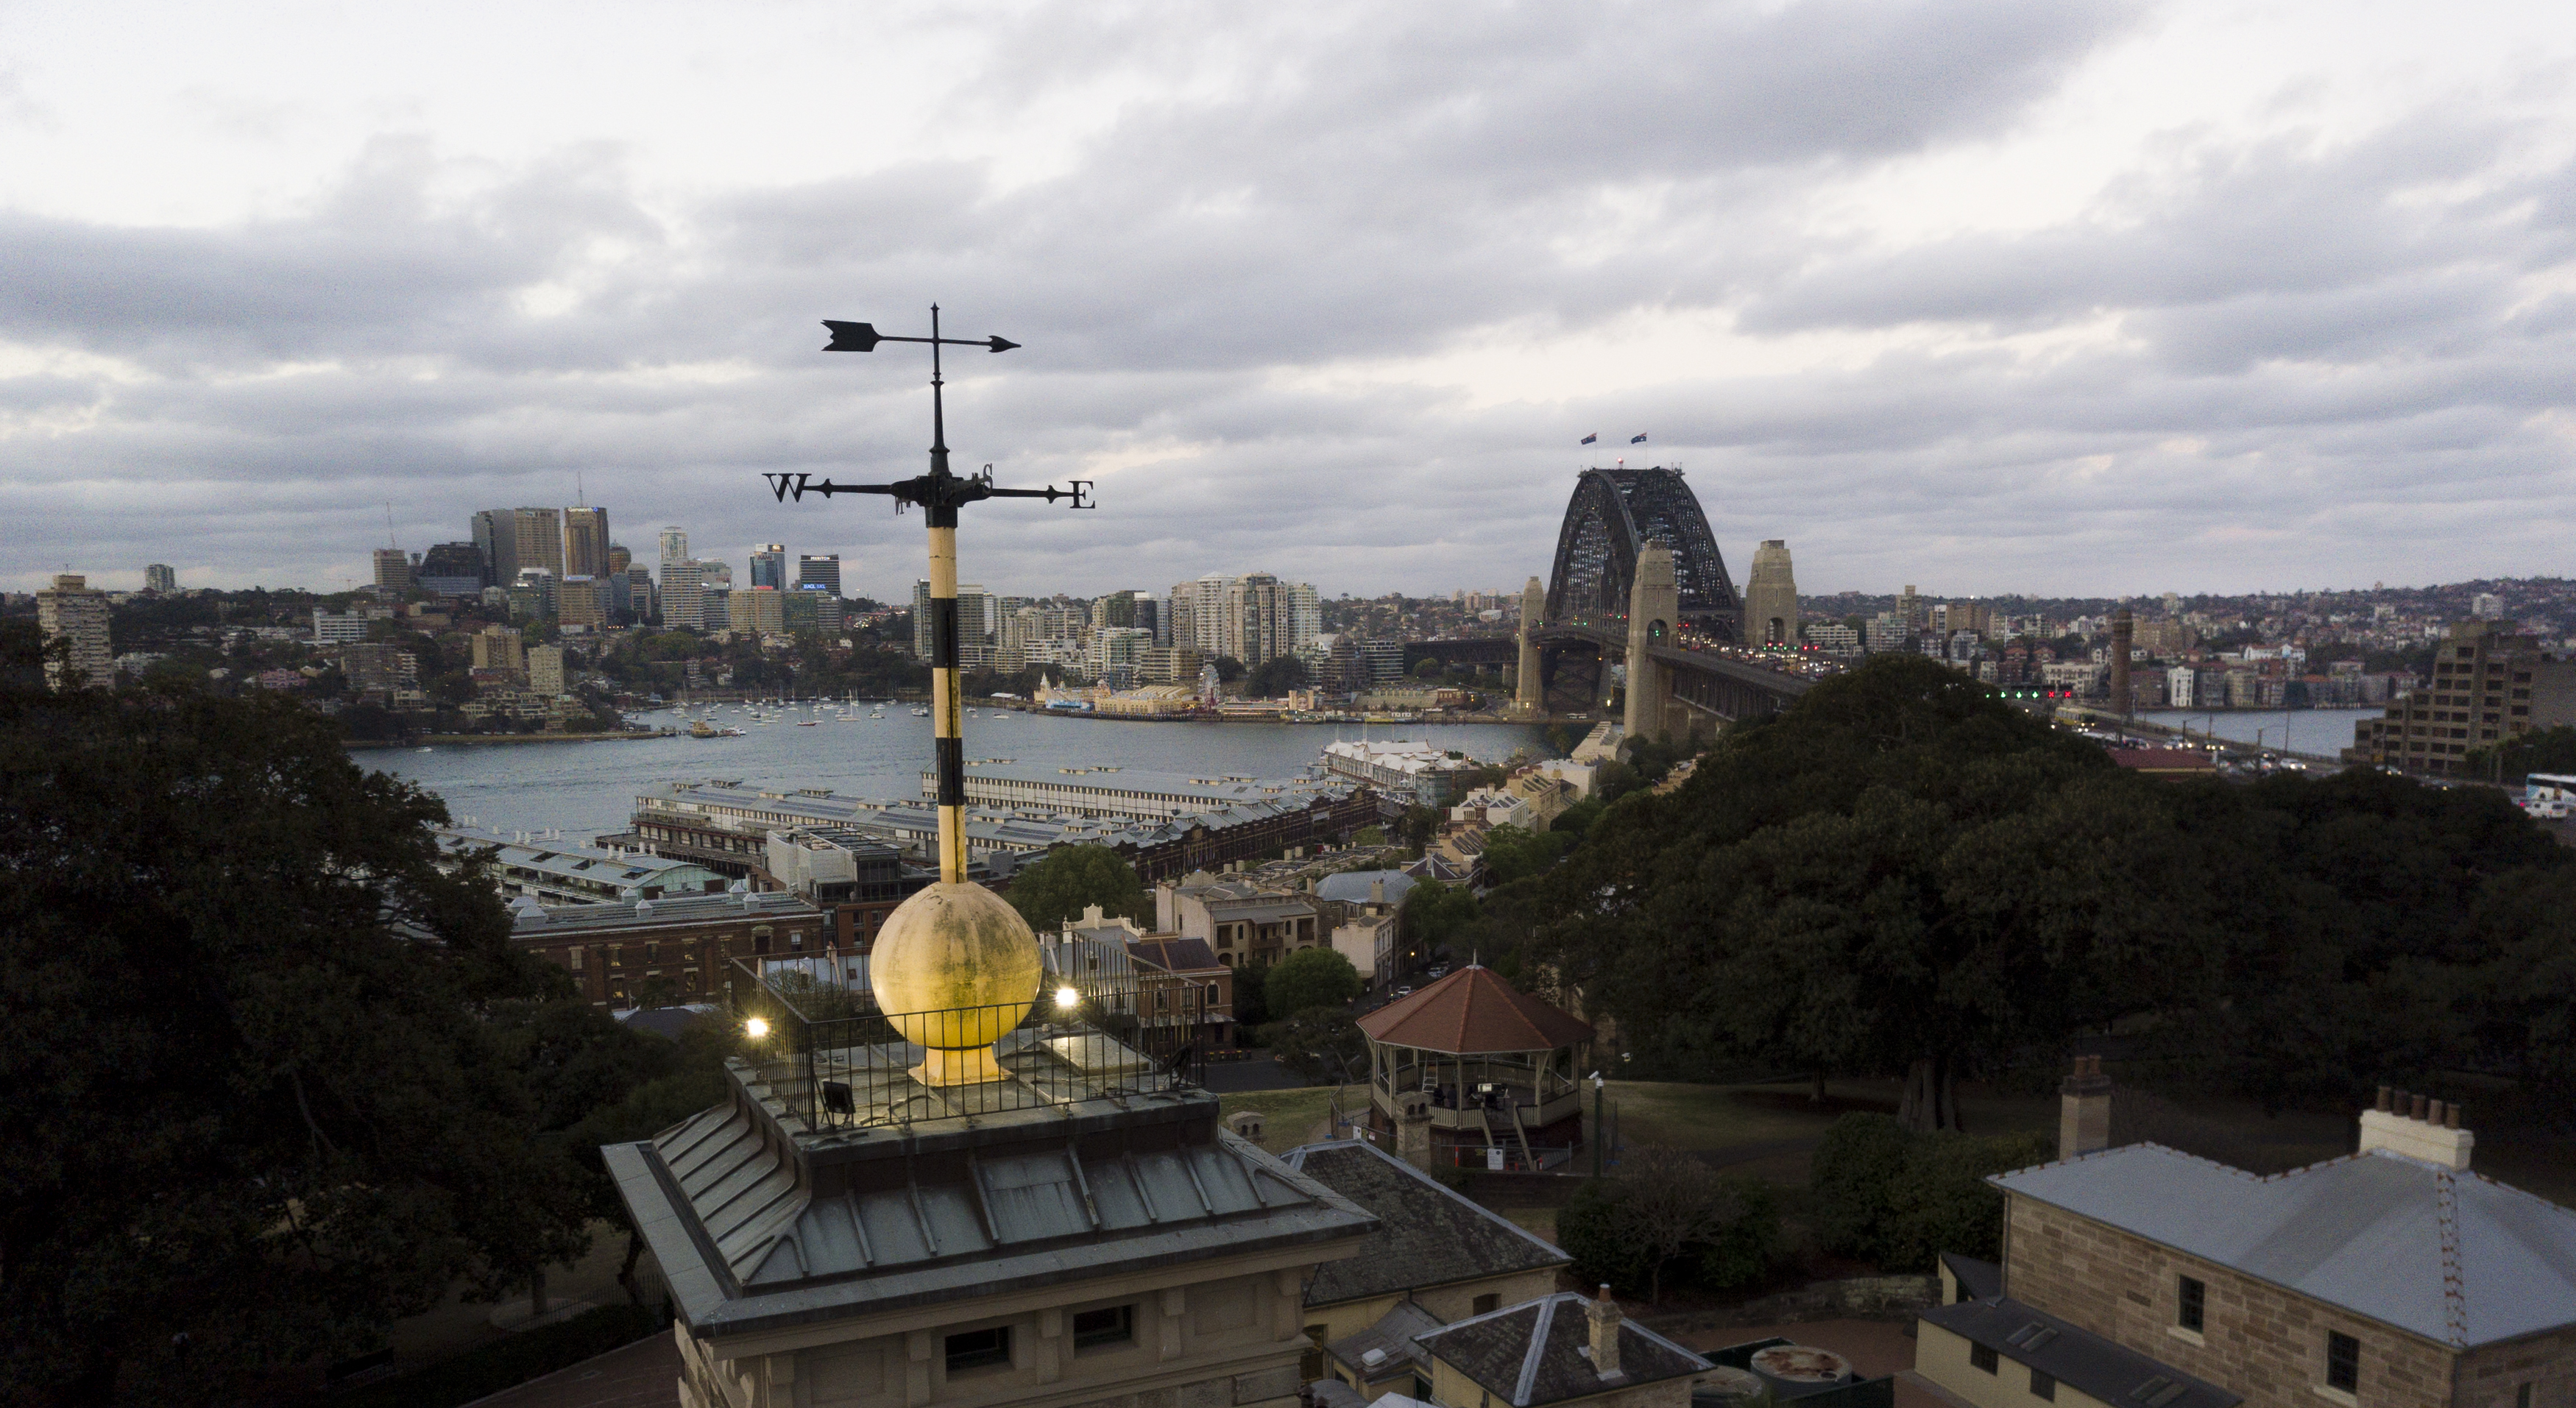 Aerial photo with a weathervane, mounted on top of a large yellow time ball, with various sandstone buildings below. The Sydney Harbour Bridge, The Rocks area, Sydney Harbour and Luna Park can be seen in the background.